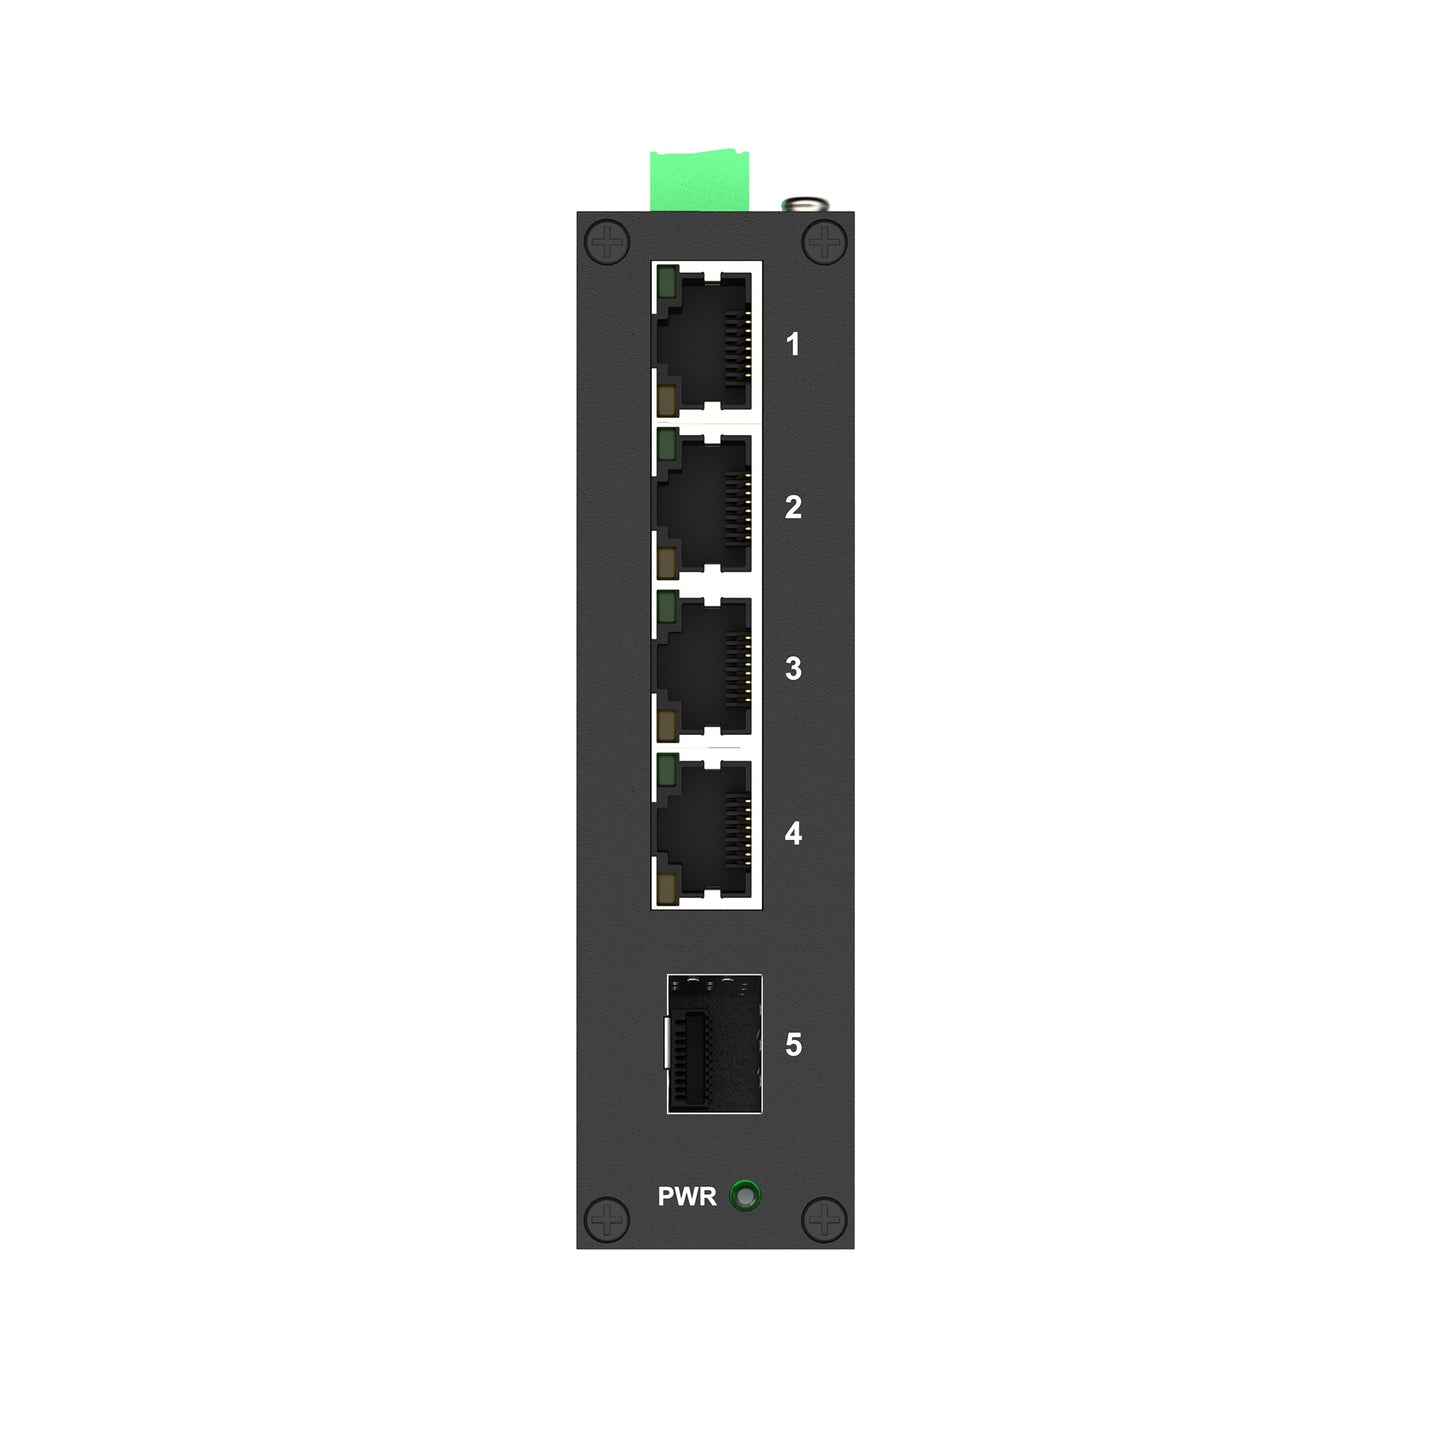 IDS1004F1 4FE+1SFP Din-rail Unmanaged Industrial Ethernet Switch